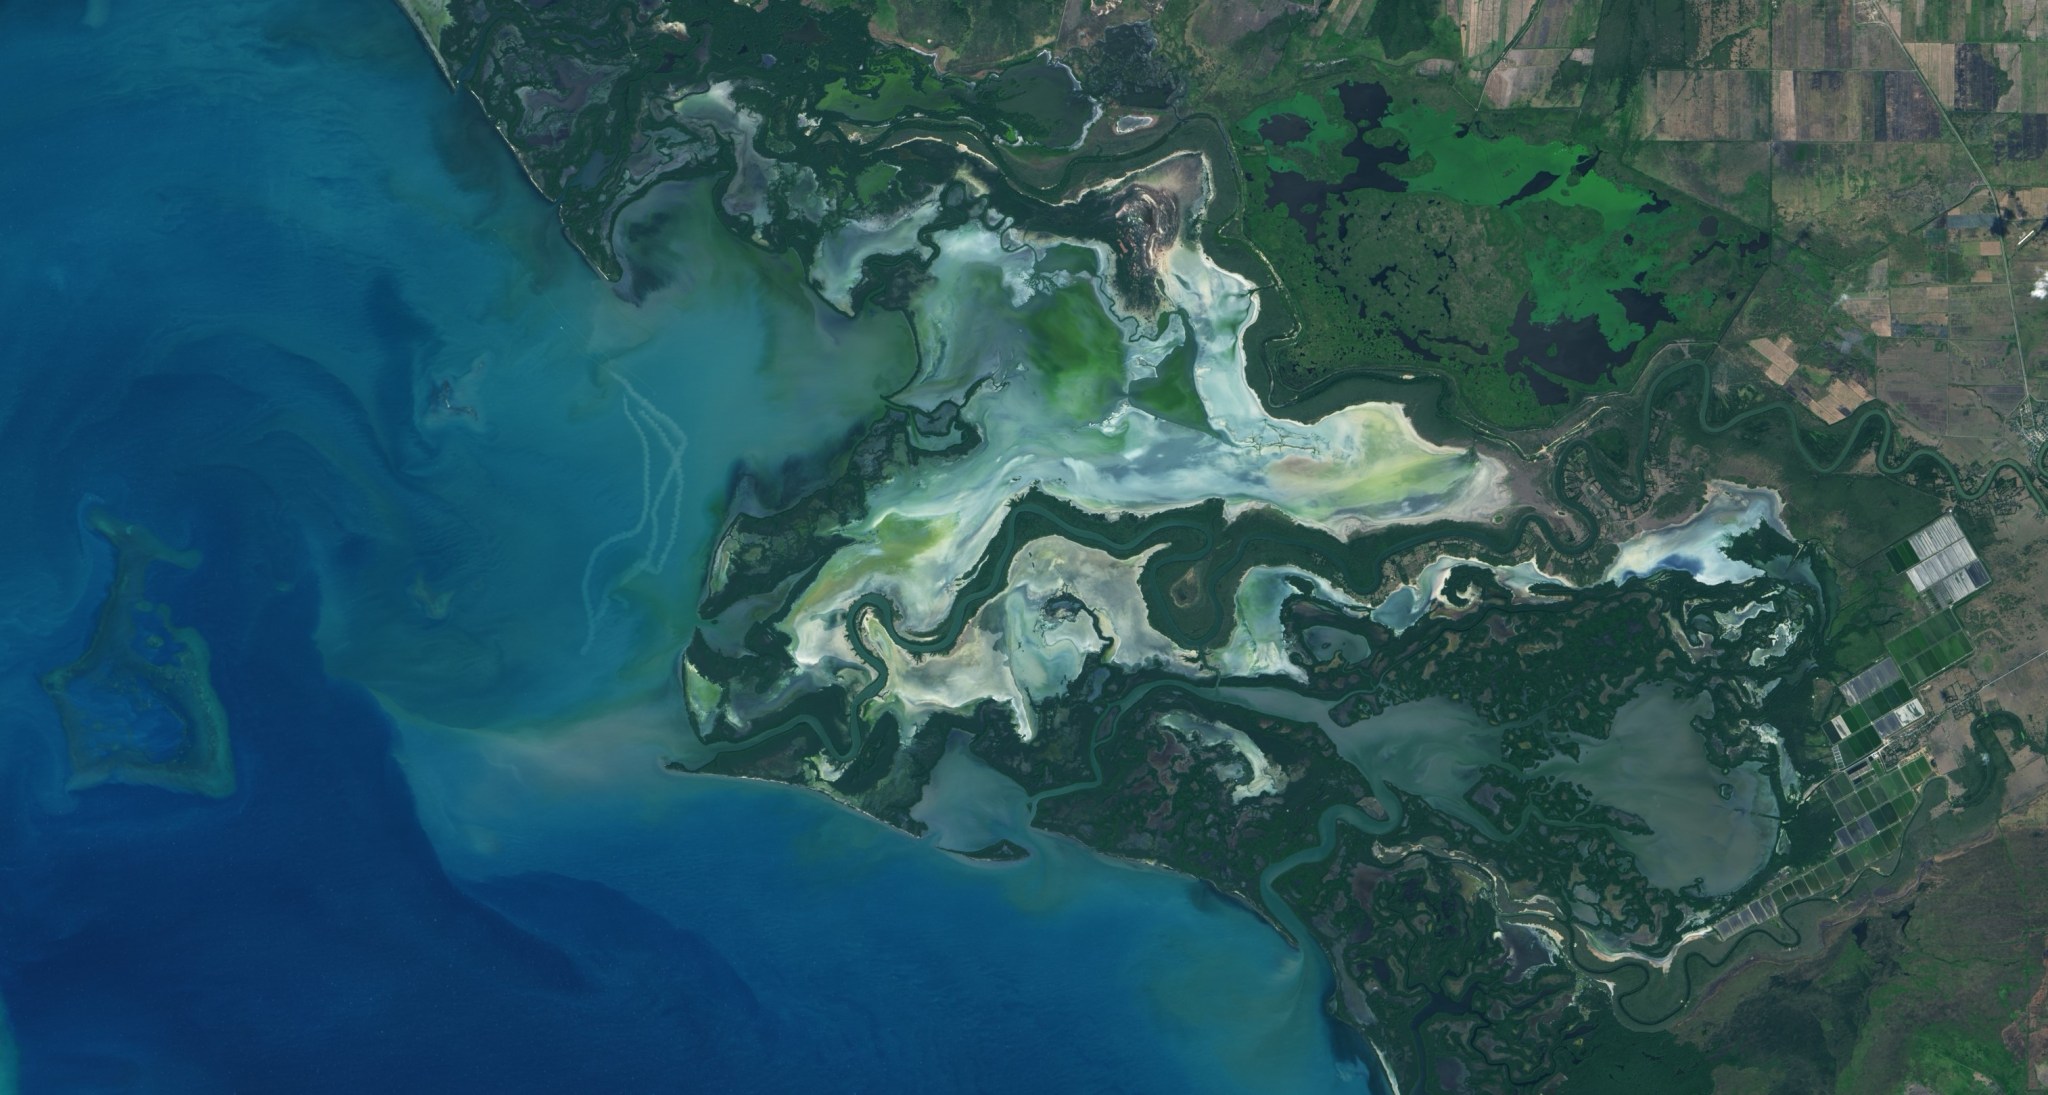 An image of the Río Cauto Delta, which appears as a roughly arrow-shaped section of land pointing out from a coastline toward the left, into deep blue and green ocean. The delta shows paint-like swirls of light blue, gray, and green, which contrast sharply with the dark green trees and land surrounding the delta. Further inland, squares of brown-green farmland can be seen.